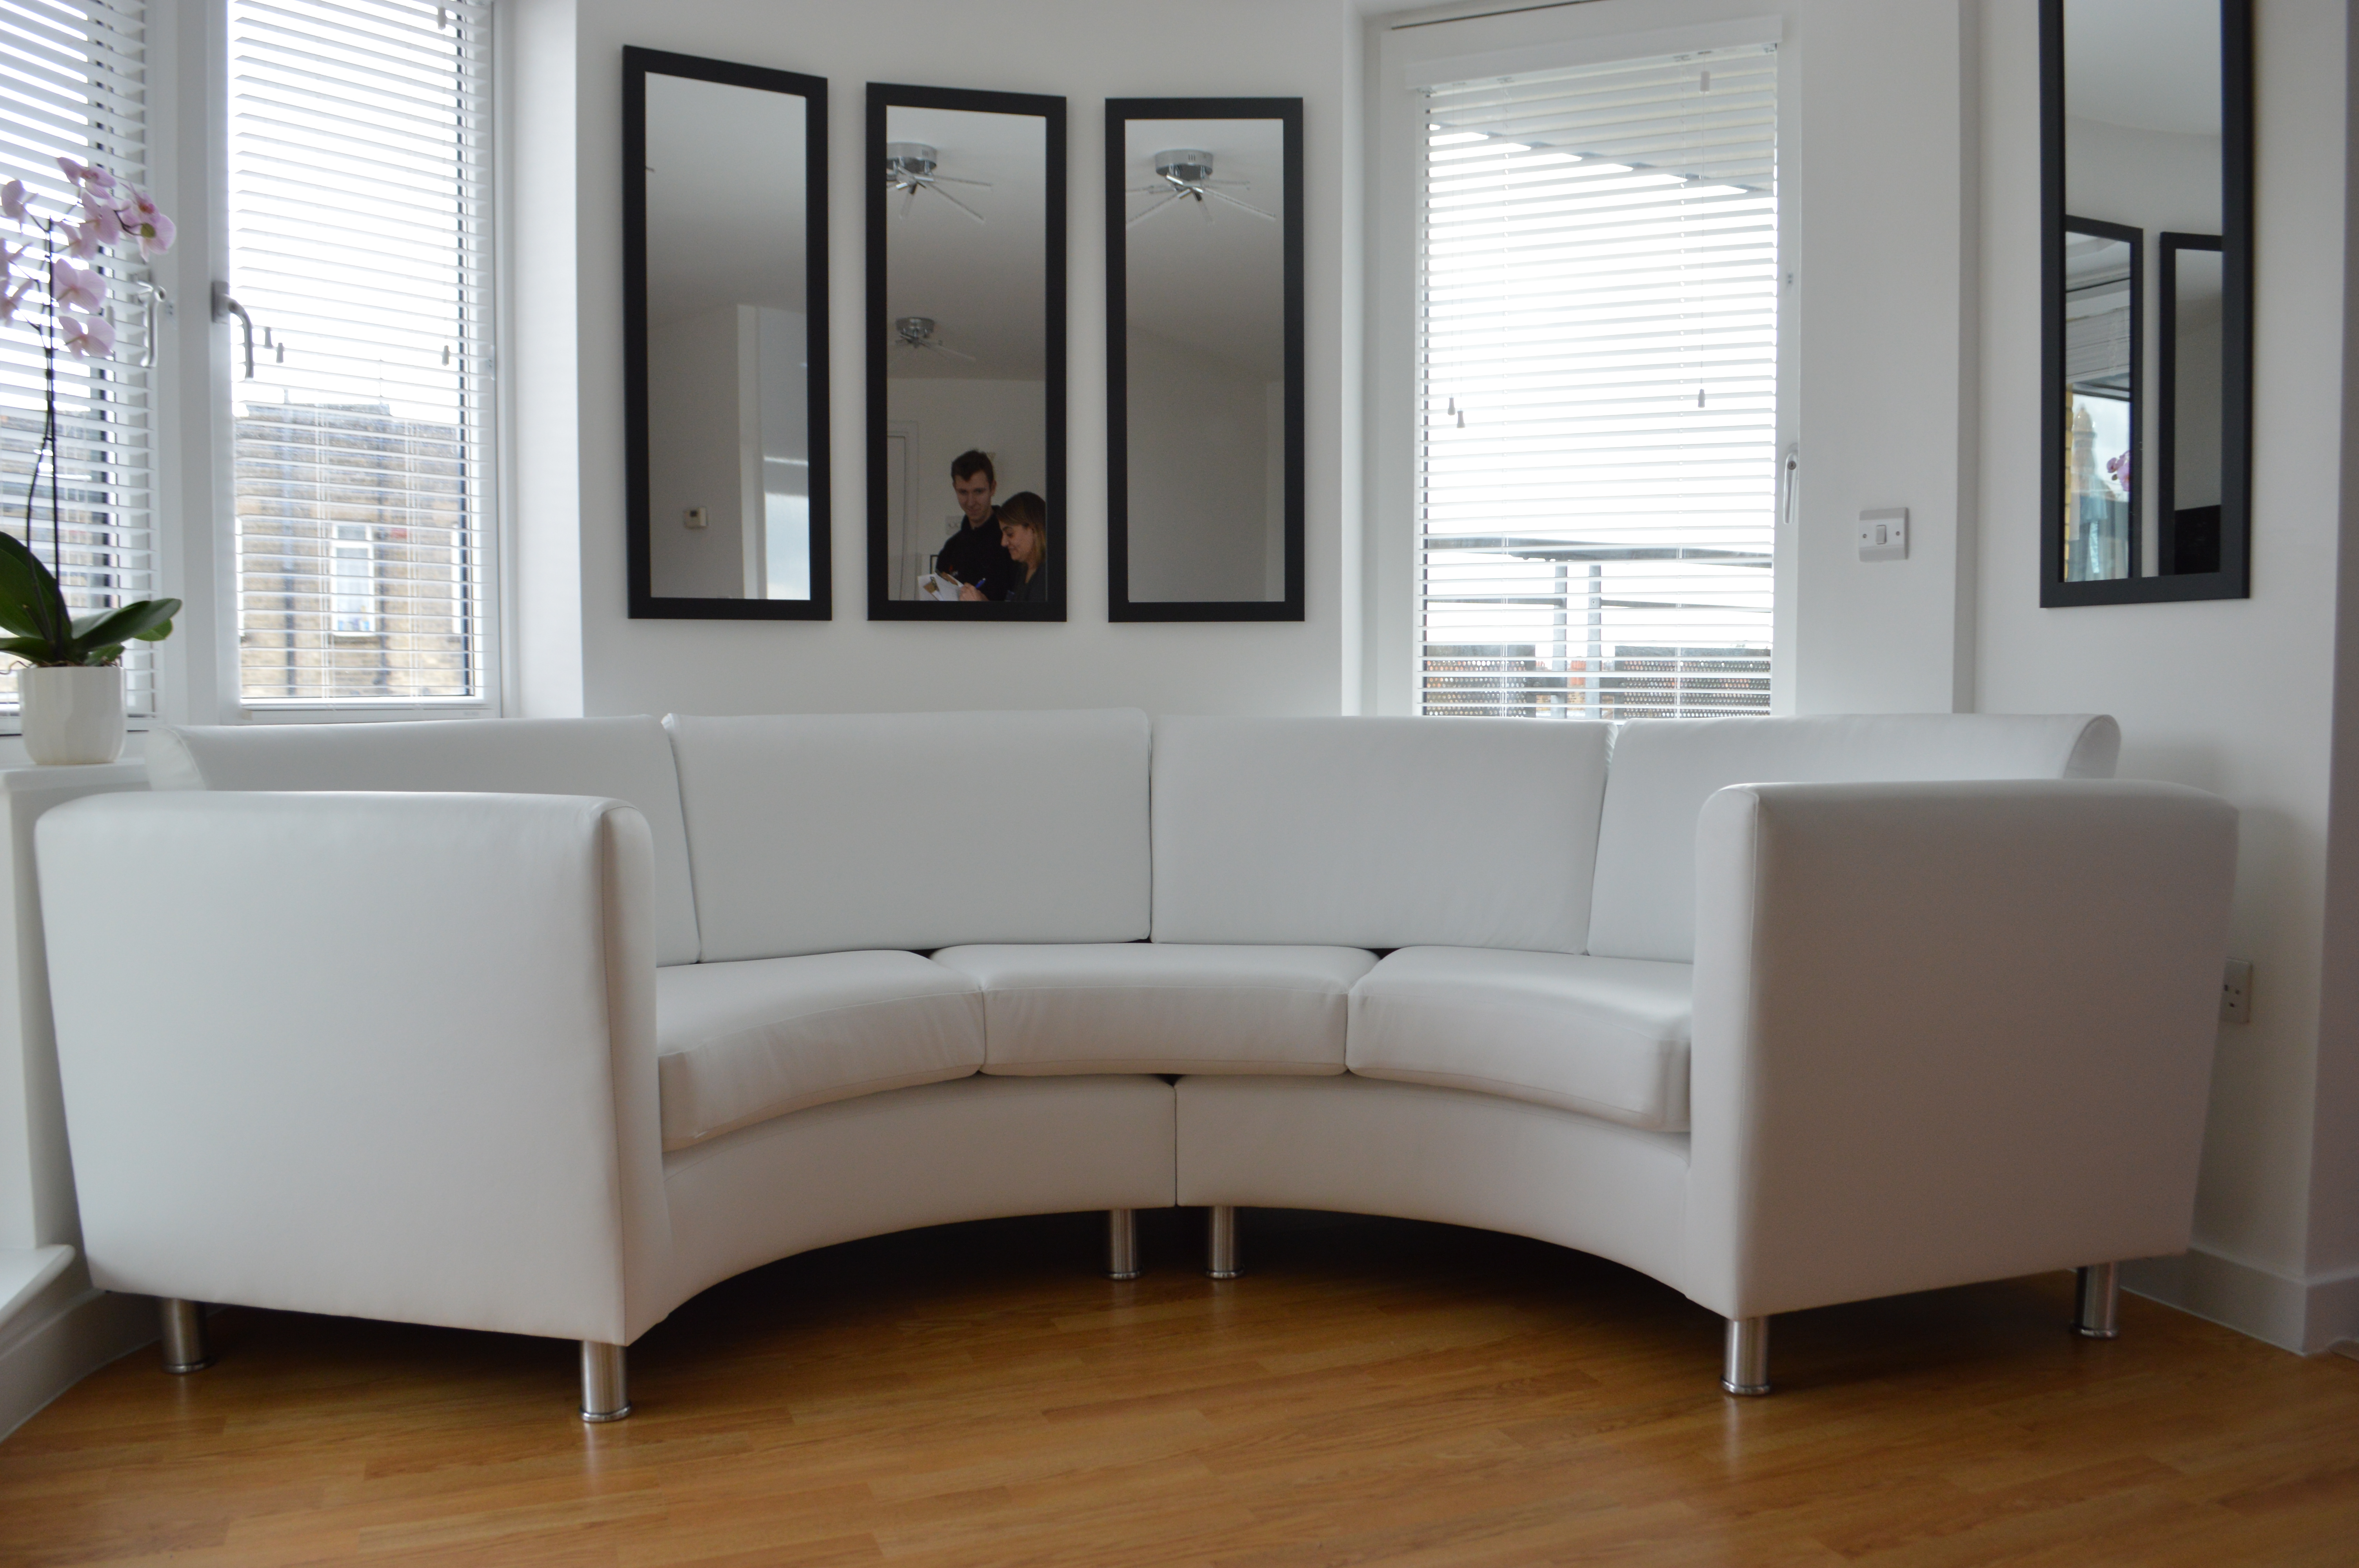 Upholsterers in London, Hill Upholstery & Design - How is the sofa frame made